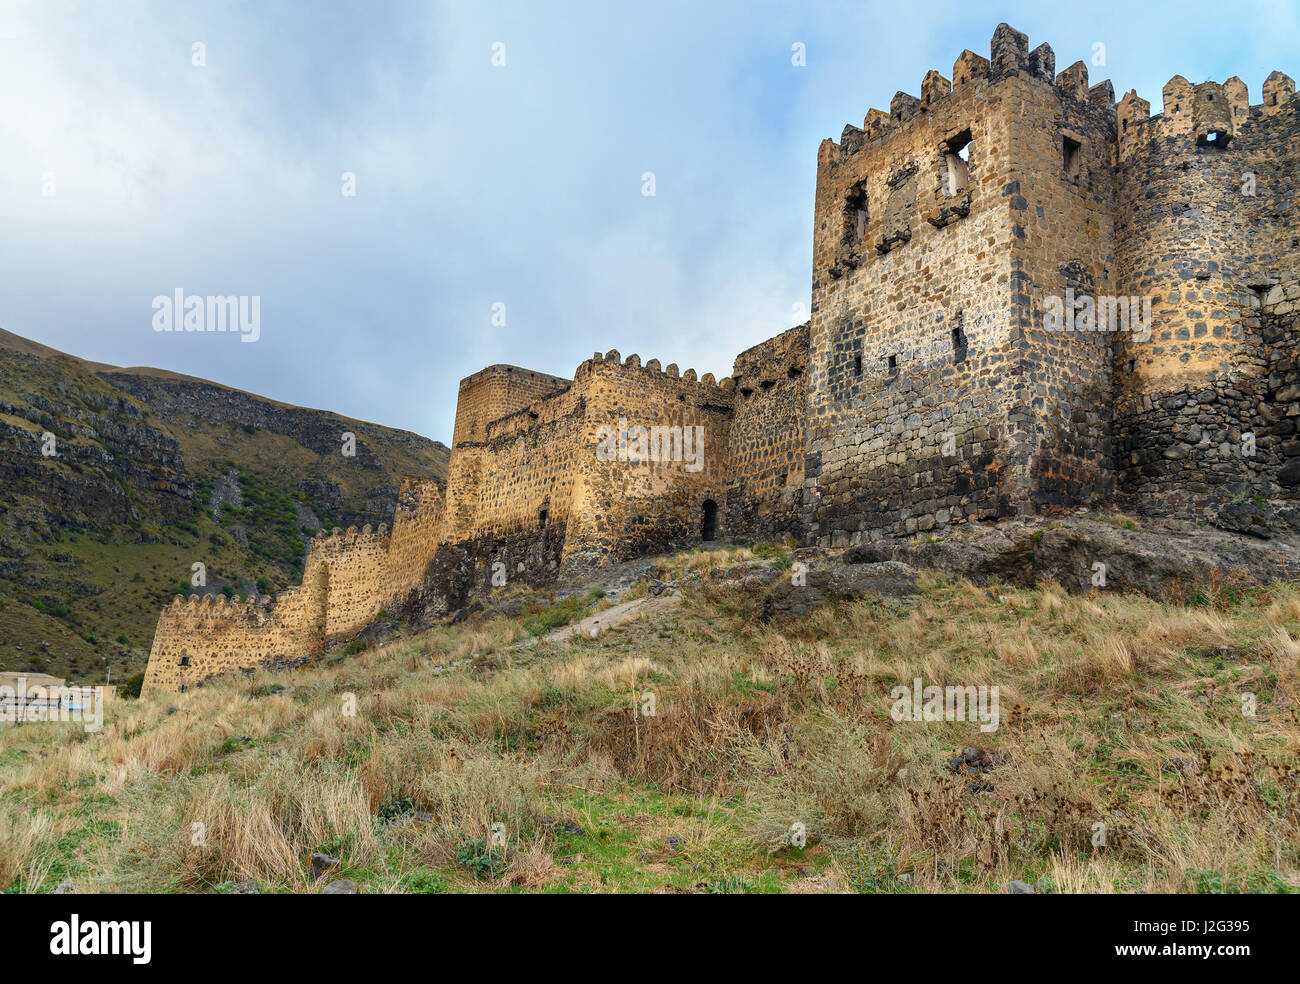 Khertvisi fortress on mountain. It is one of the oldest fortresses in ...